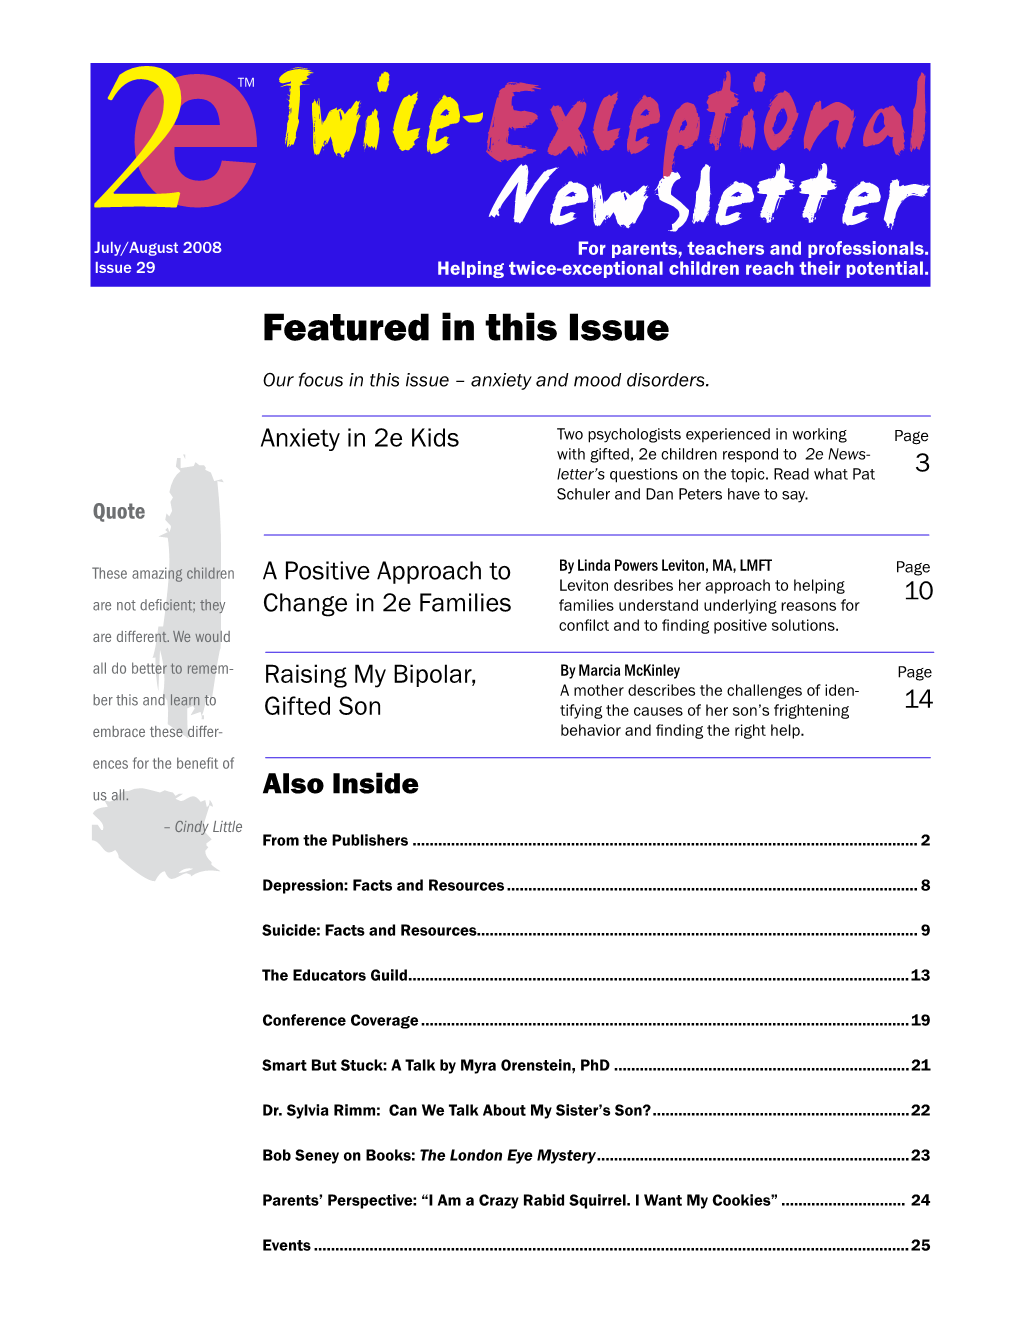 Twice-Exceptional Newsletter 2July/August 2008 for Parents, Teachers and Professionals